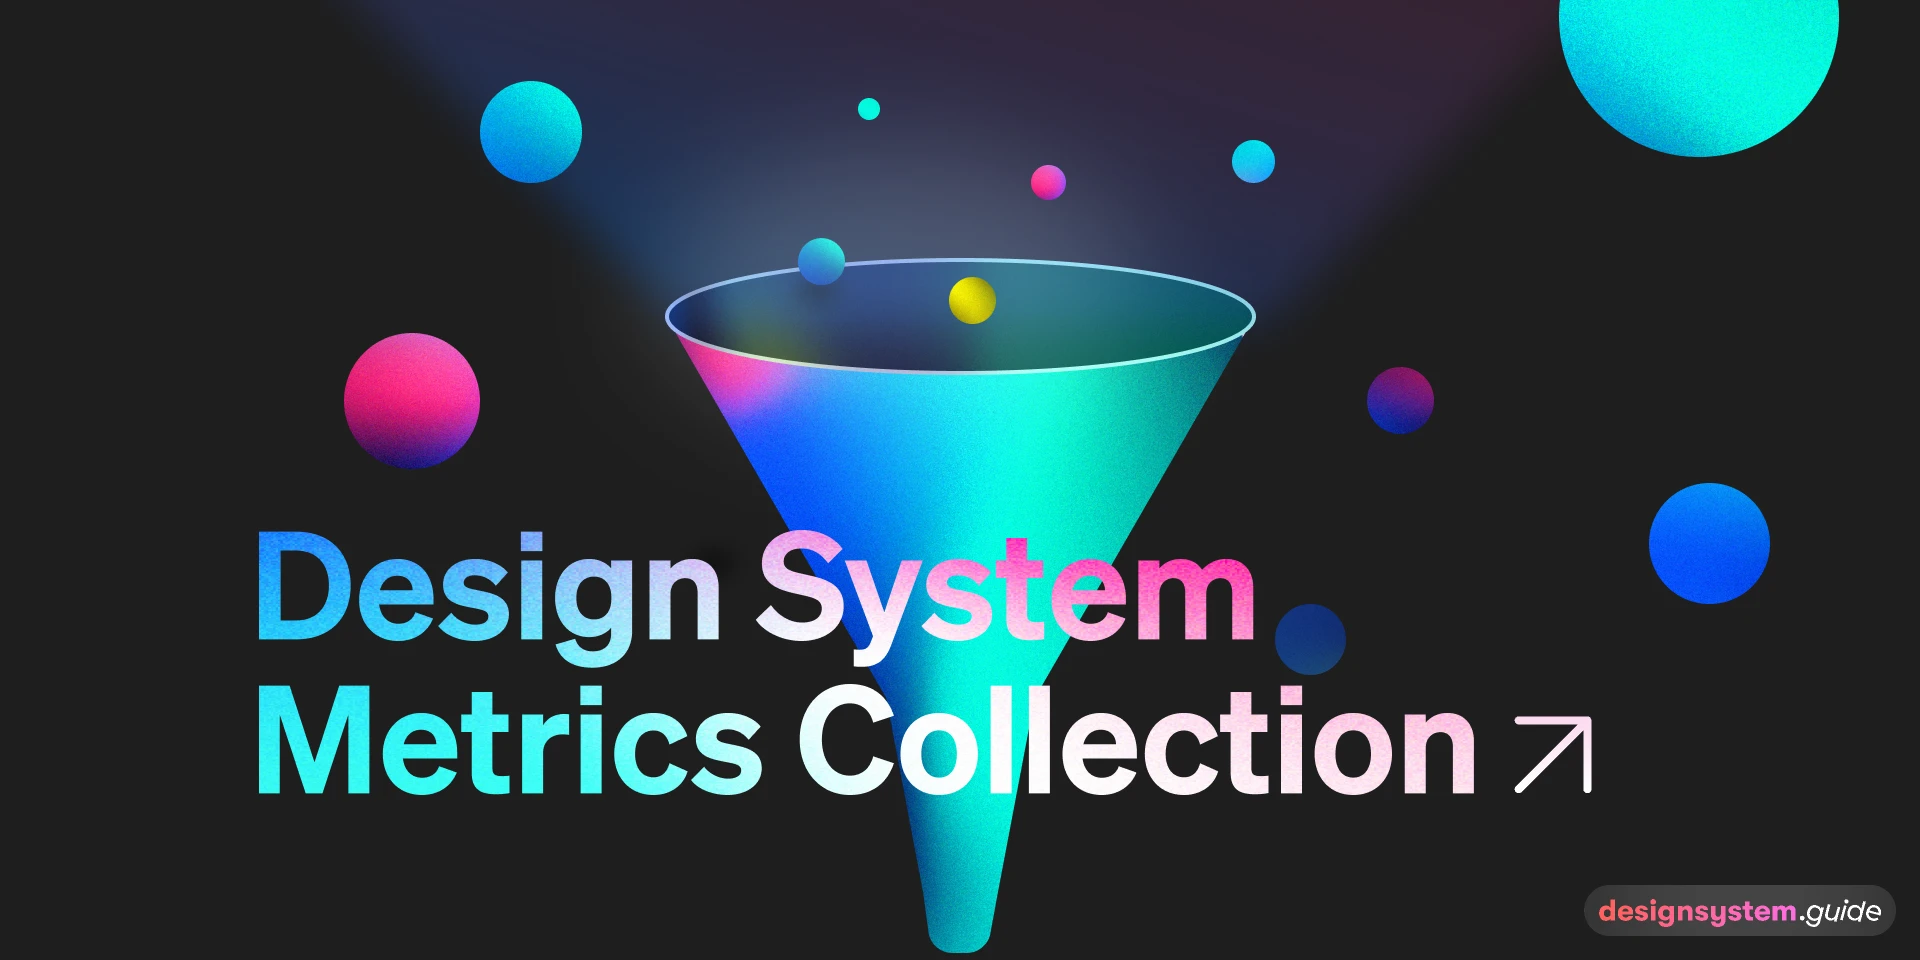 Design System Metrics Collection for Figma and Adobe XD